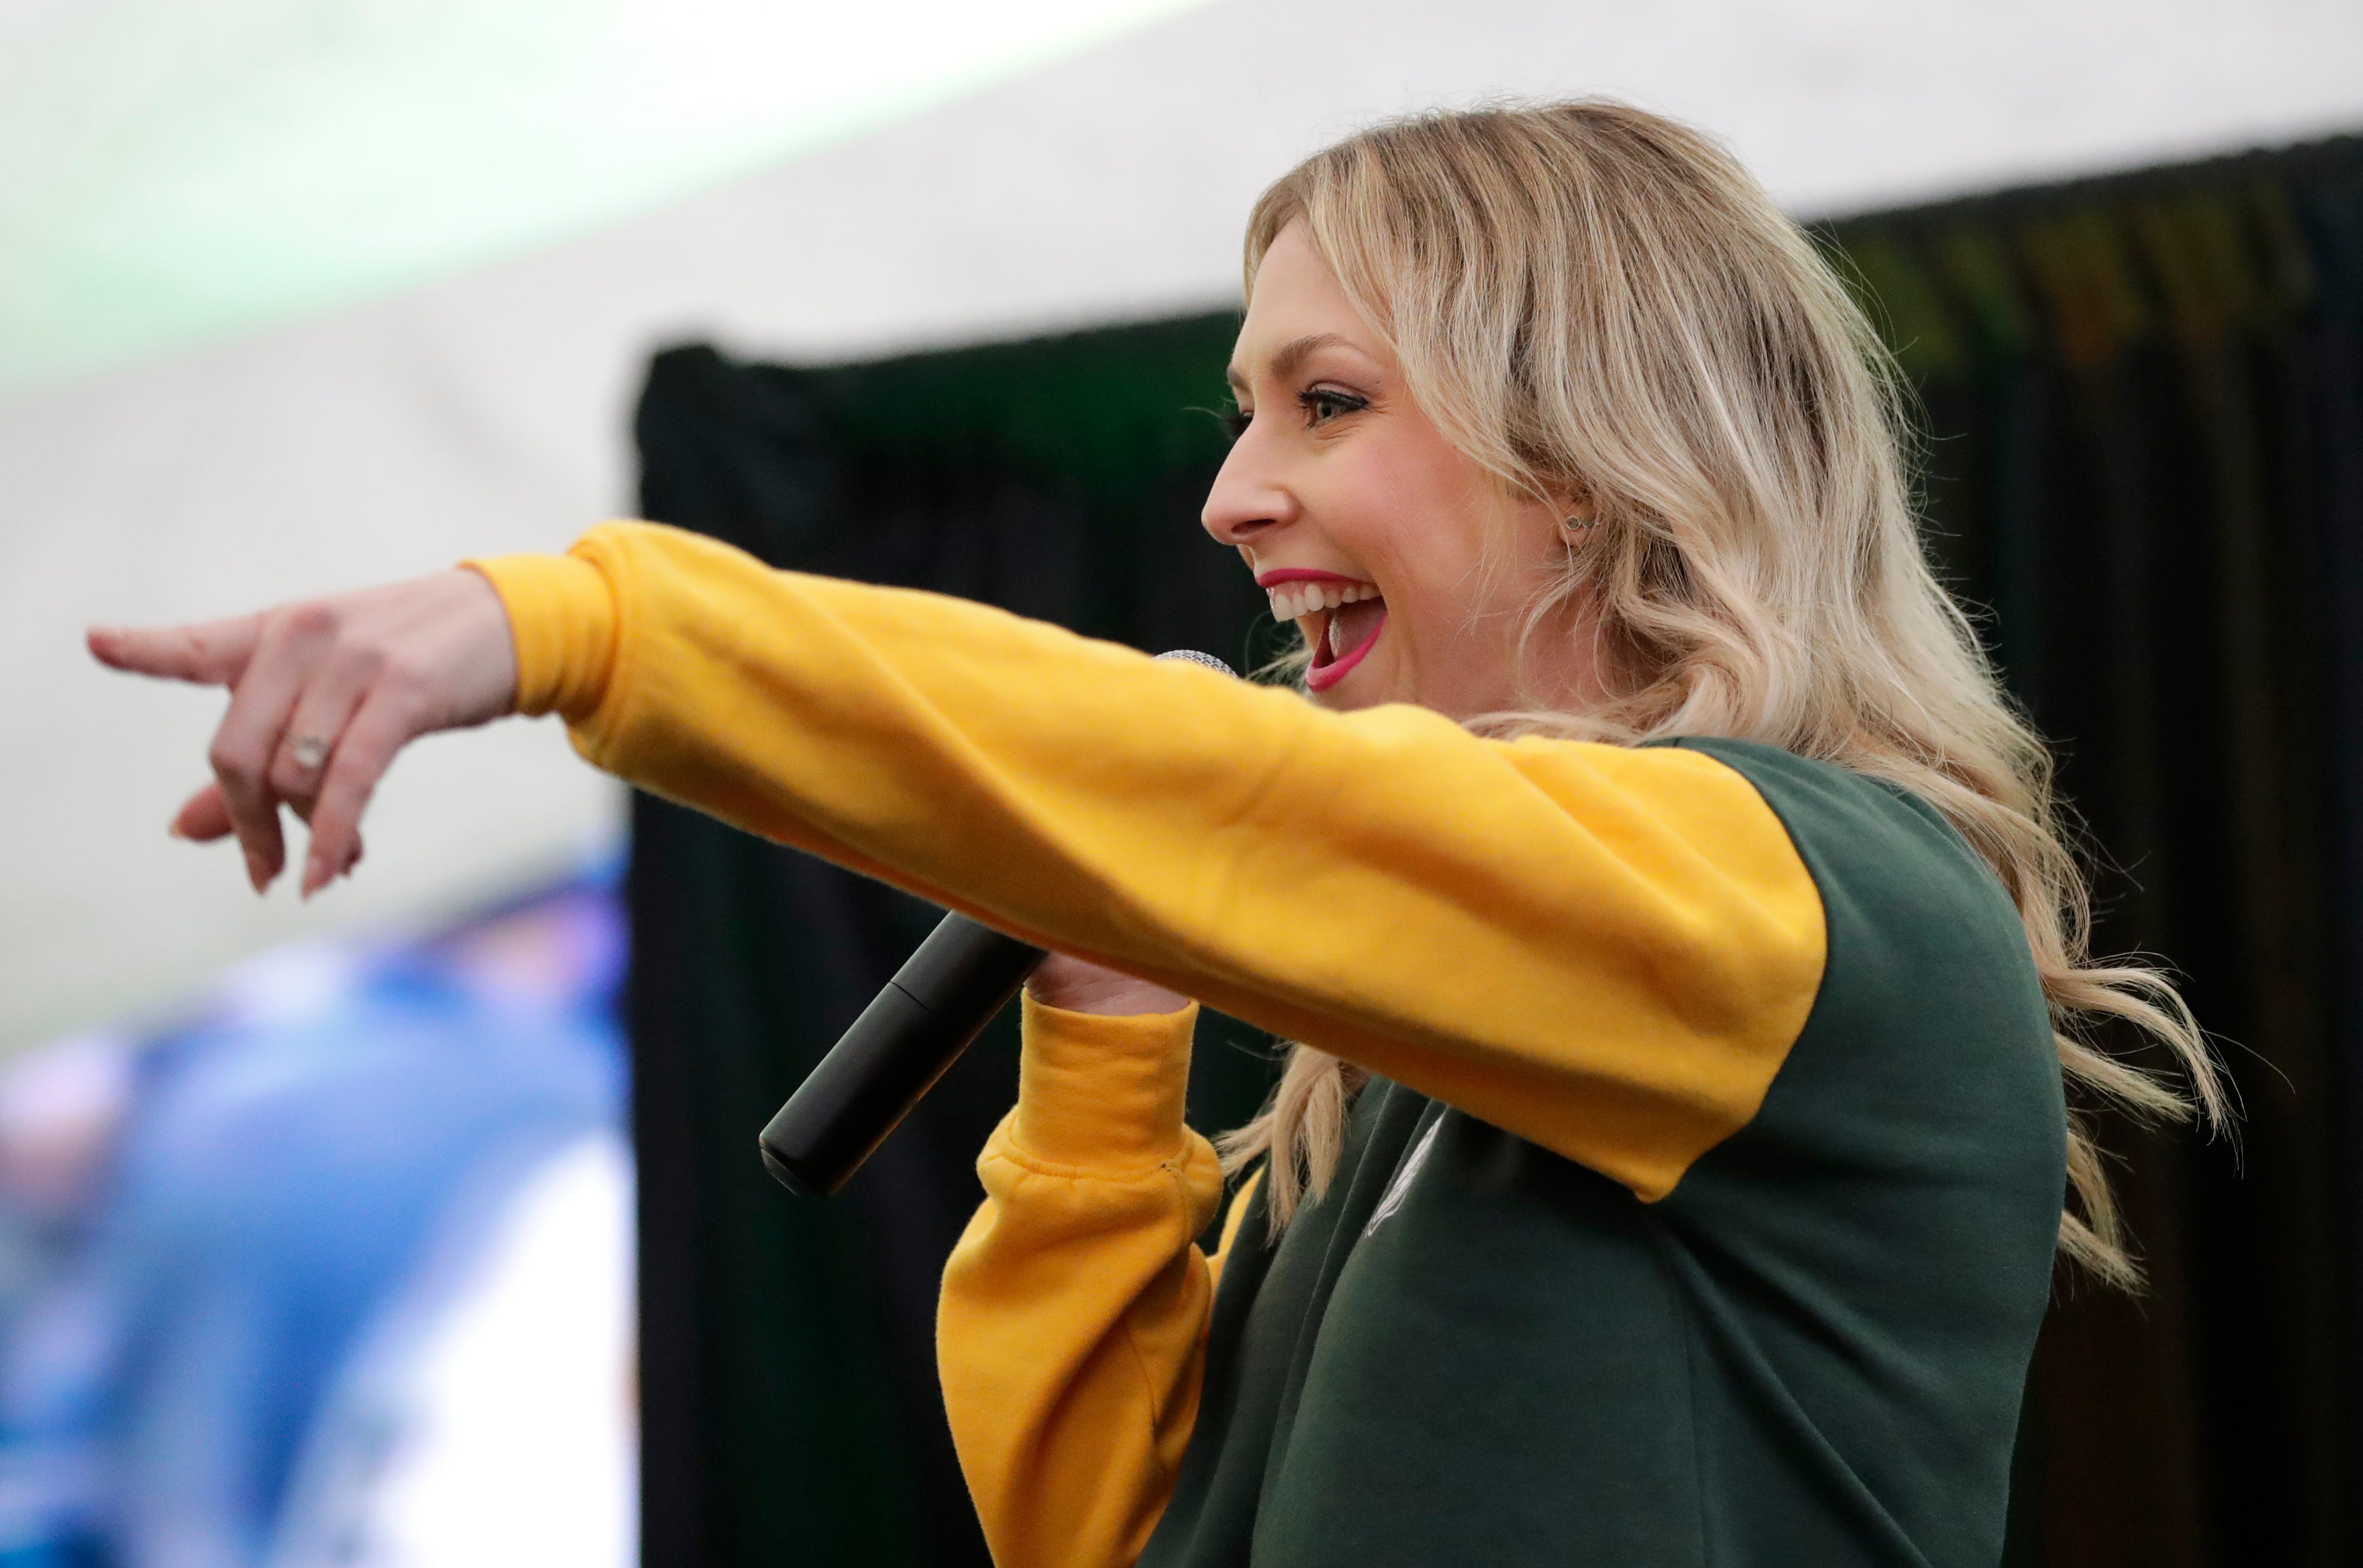 Packers Everywhere host Rebecca Zaccard gets the crowd pumped up during the Packers Everywhere pep rally Friday, January 19, 2024, at The Patio in Palo Alto, California.